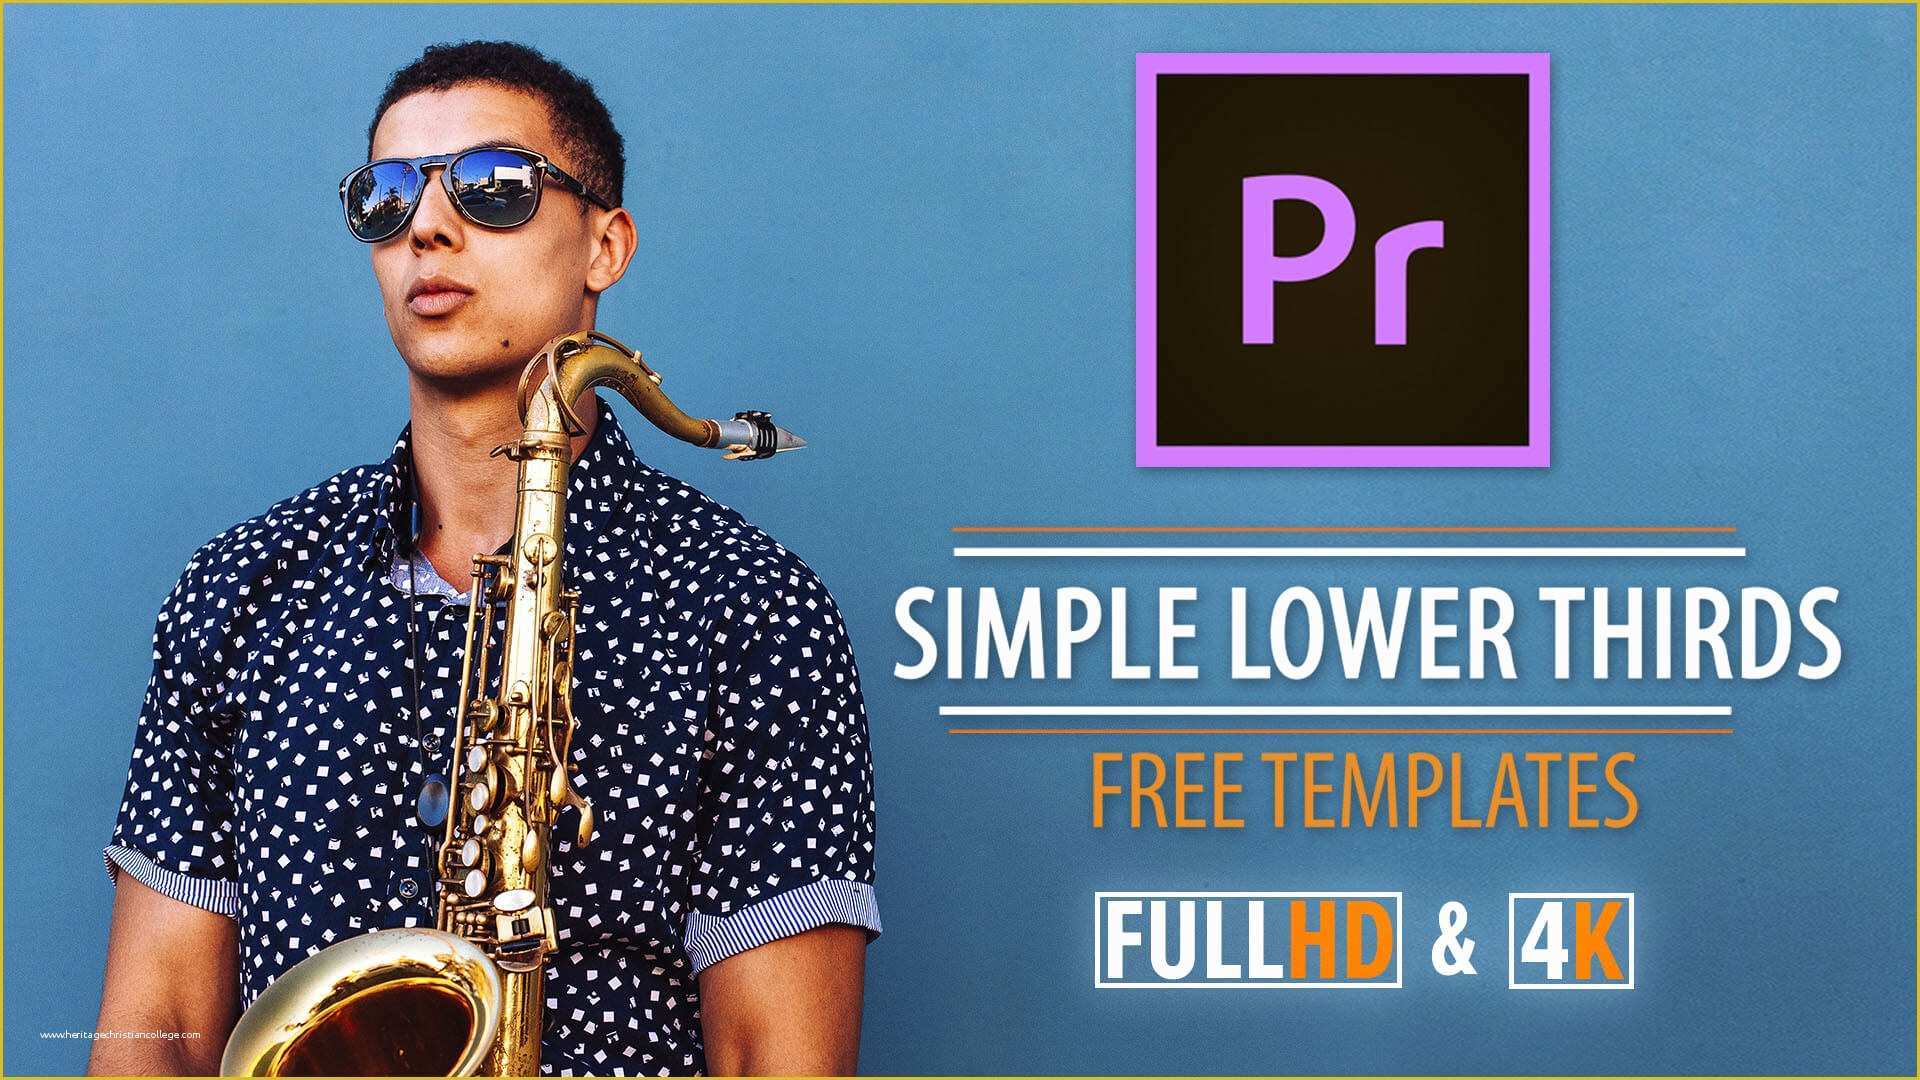 Premiere Templates Free Of Simple Lower Thirds Templates for Premiere Pro